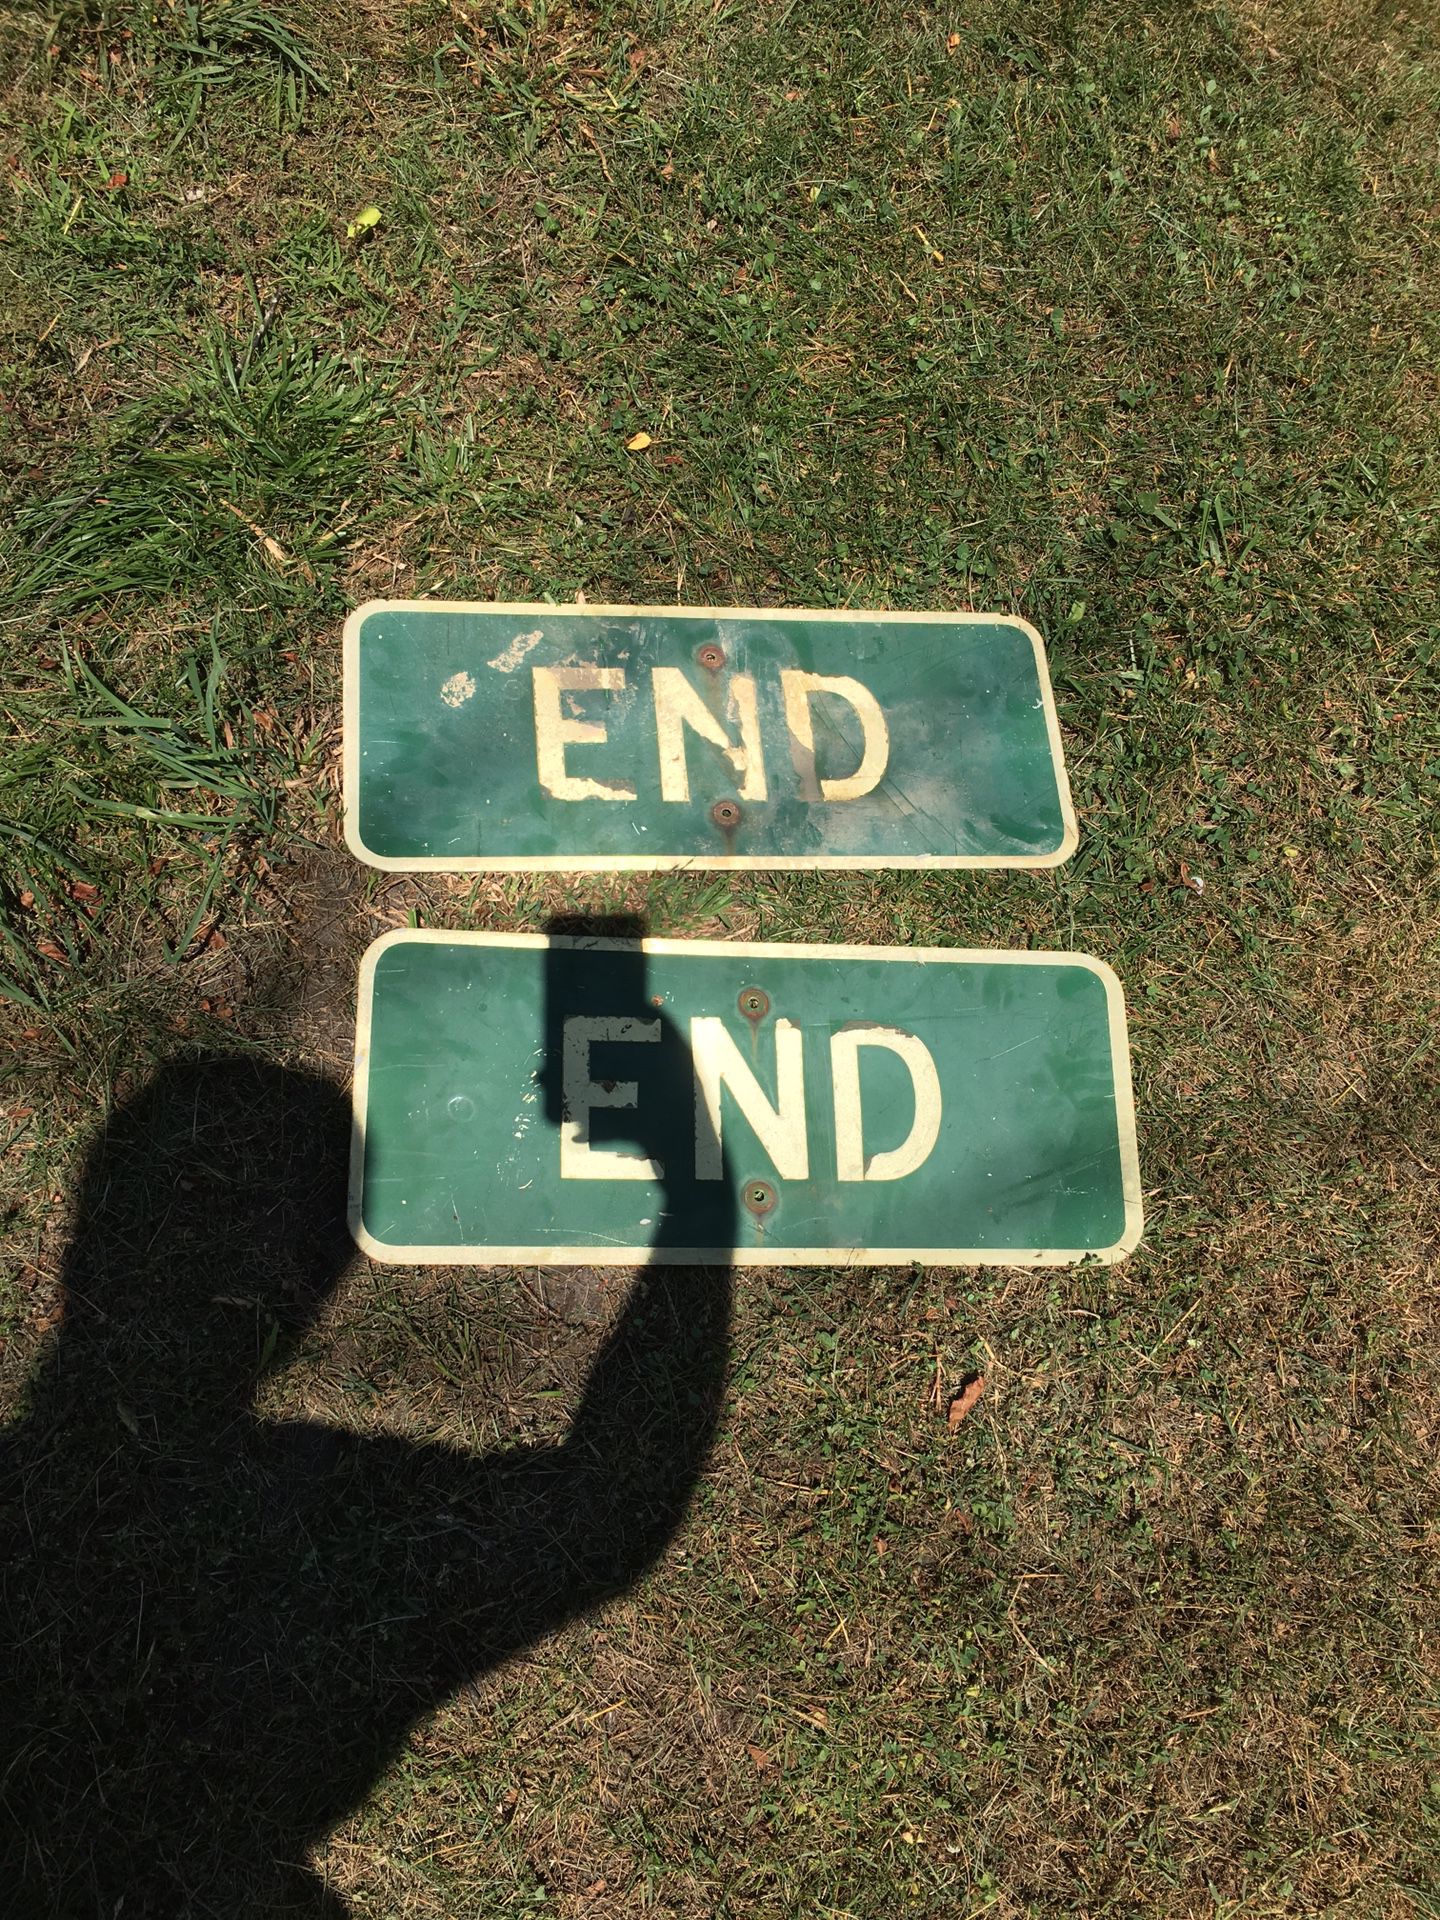 2 End sign